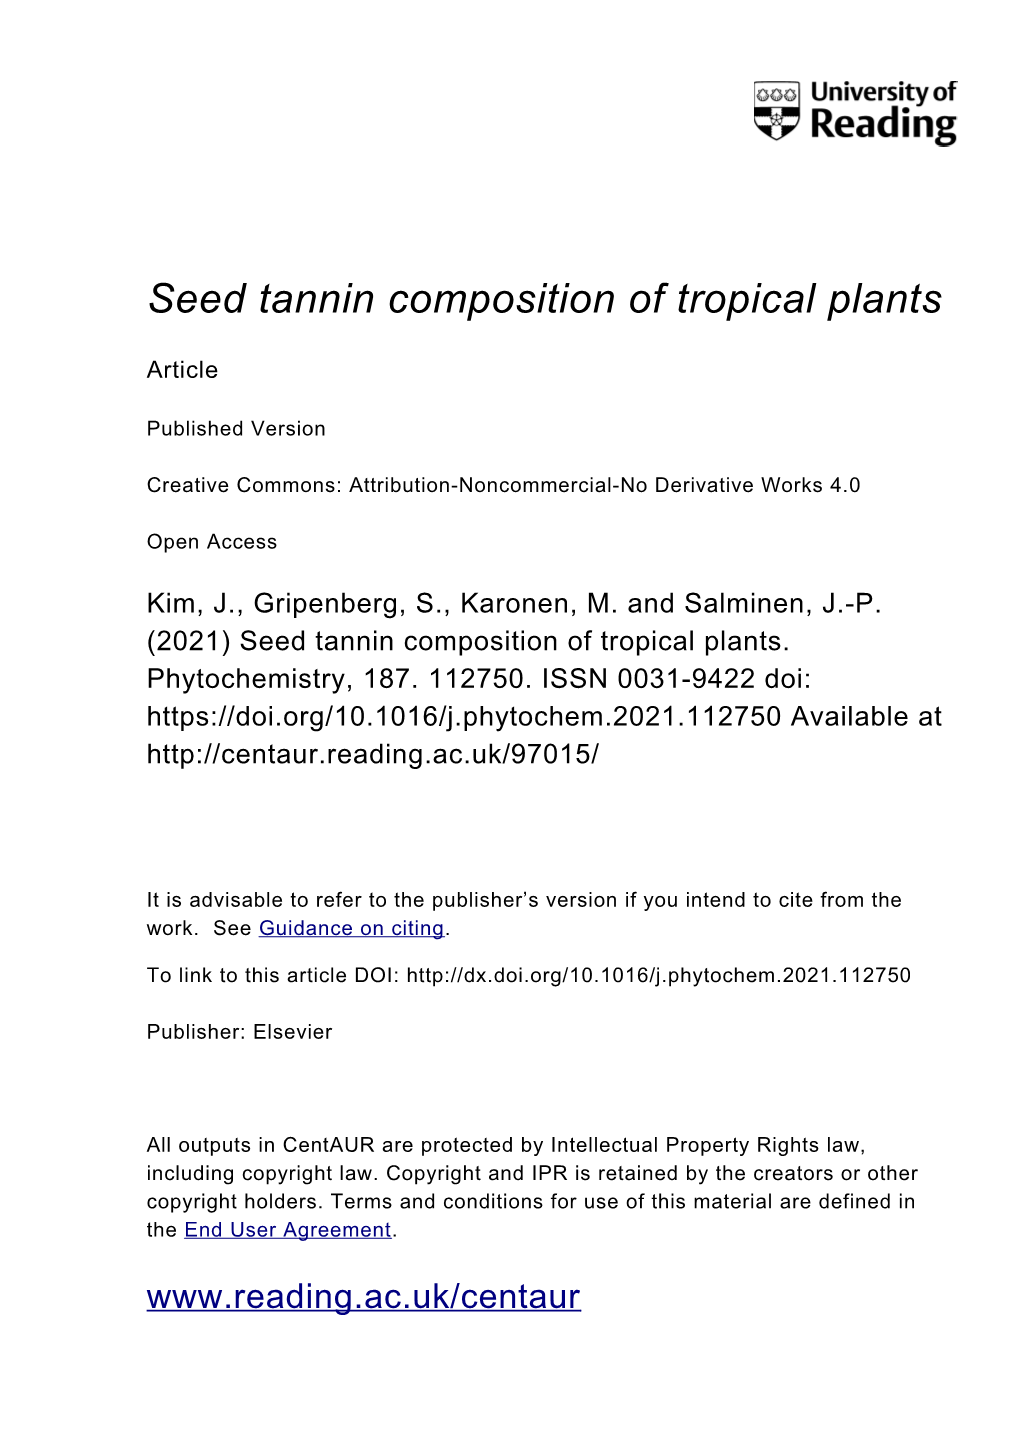 Seed Tannin Composition of Tropical Plants